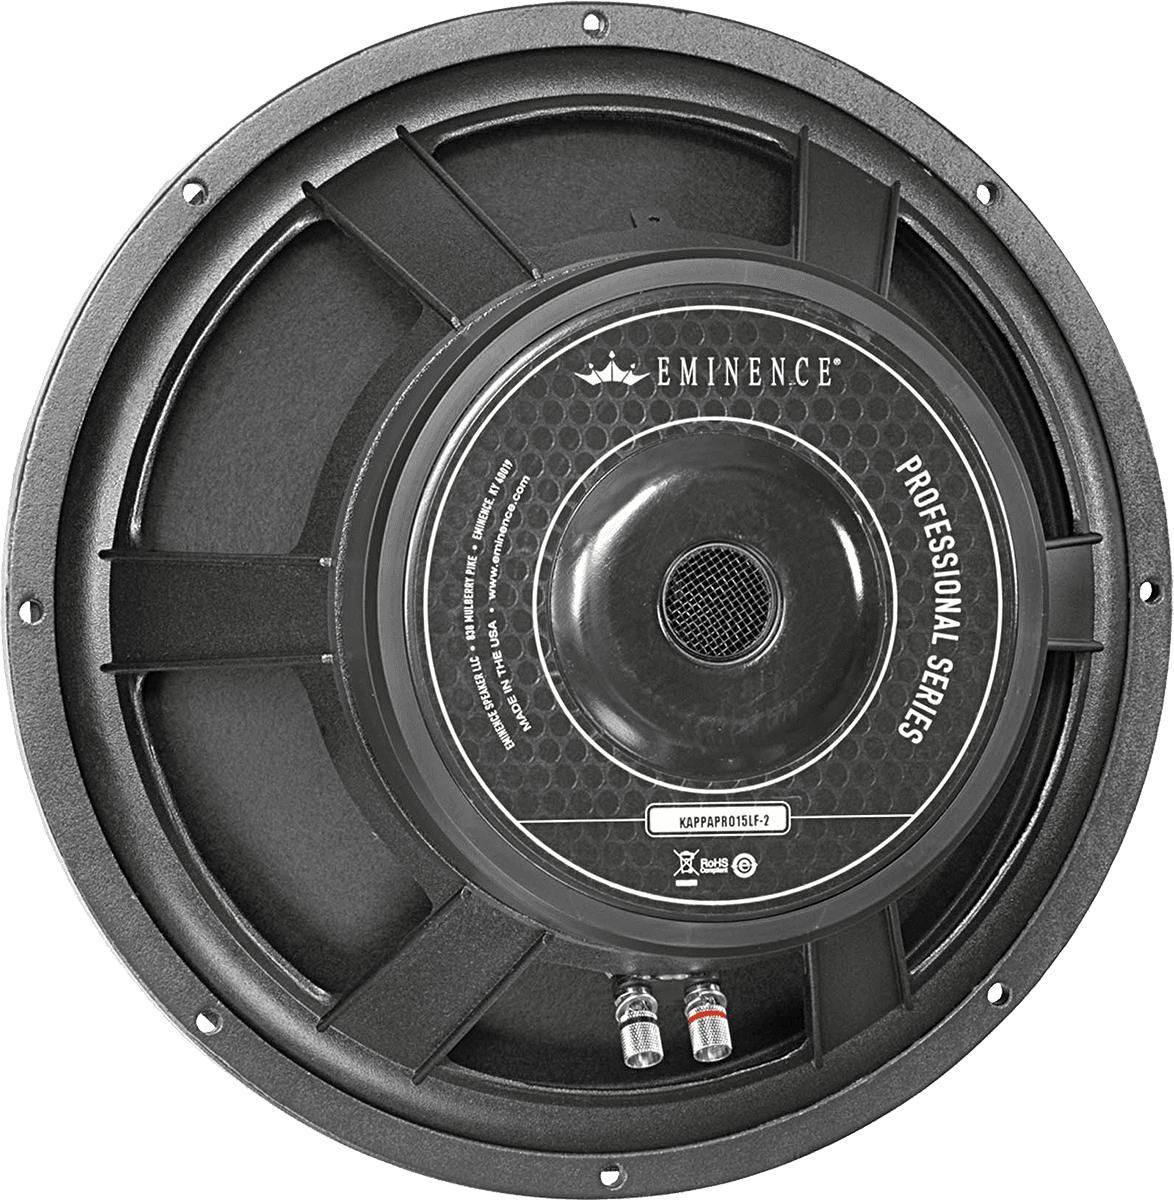 Hp special basse / 38cm / 600w rms / 8 ohms / eminence